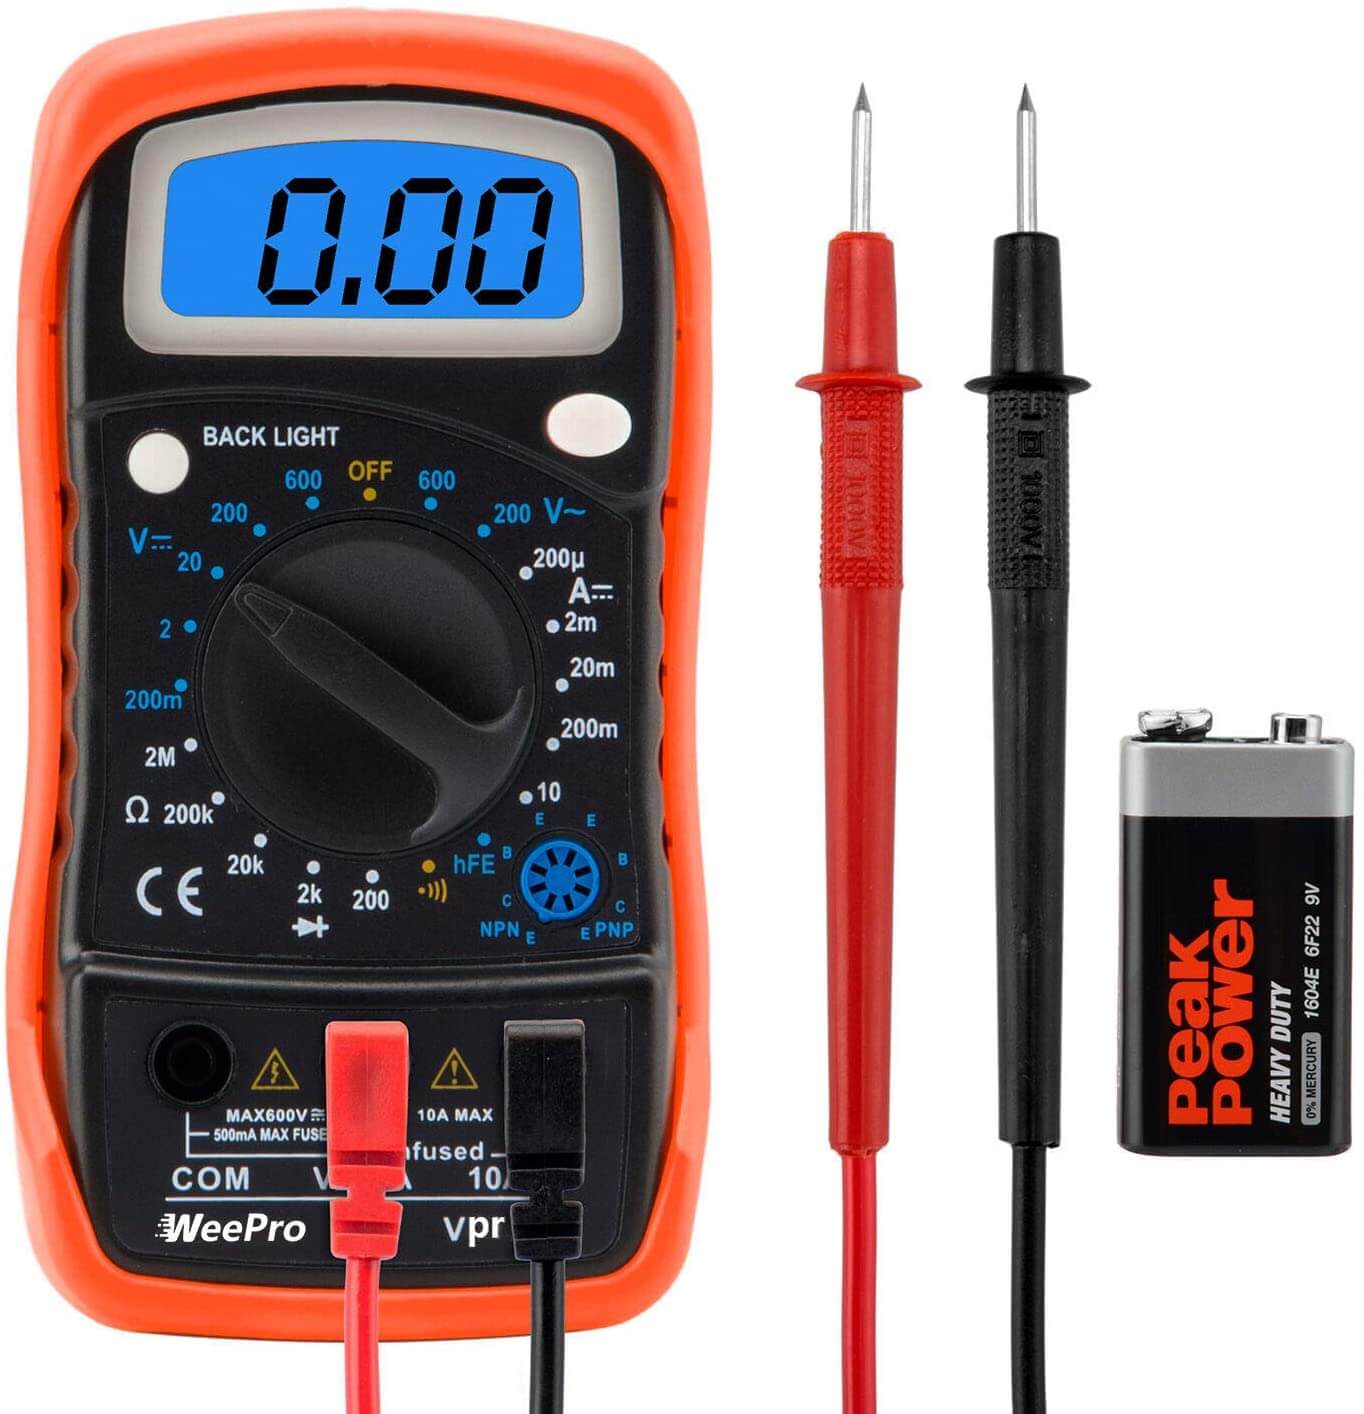 How to test a light switch with a digital multimeter Top 15 Best Digital Multimeter Kit Reviews In 2020